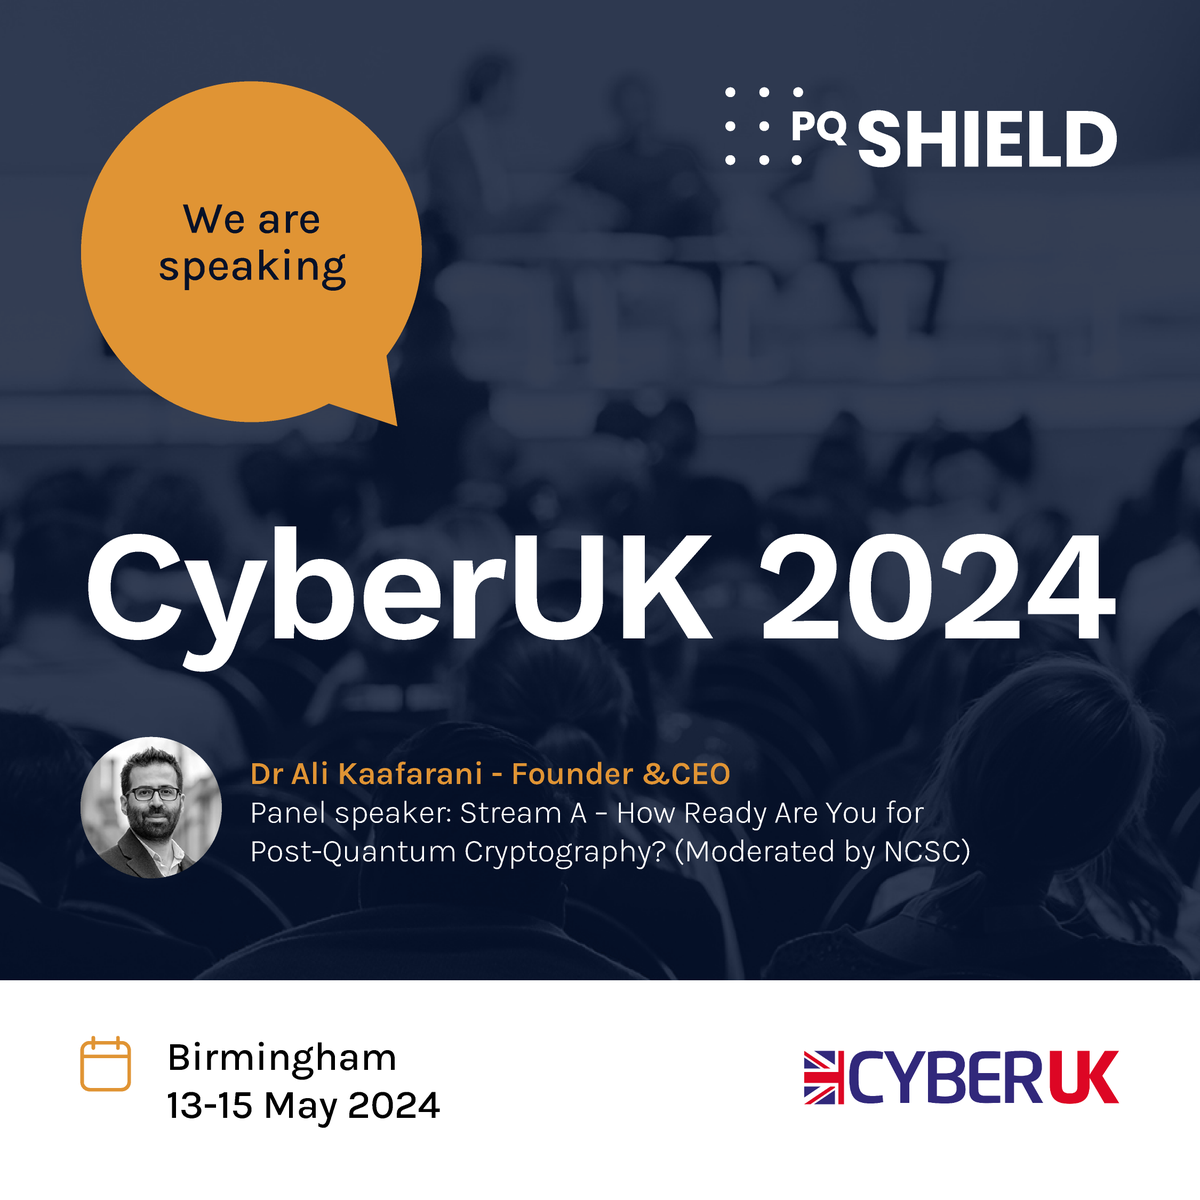 Dr Ali Kaafarani will be speaking at CyberUK, 13-15 May. Ali will take part in the Stream A panel discussion on – How Ready Are You for Post-Quantum Cryptography? (Moderated by the @NCSC). Ben Packman SVP also attending. #cybercecurity #cryptography